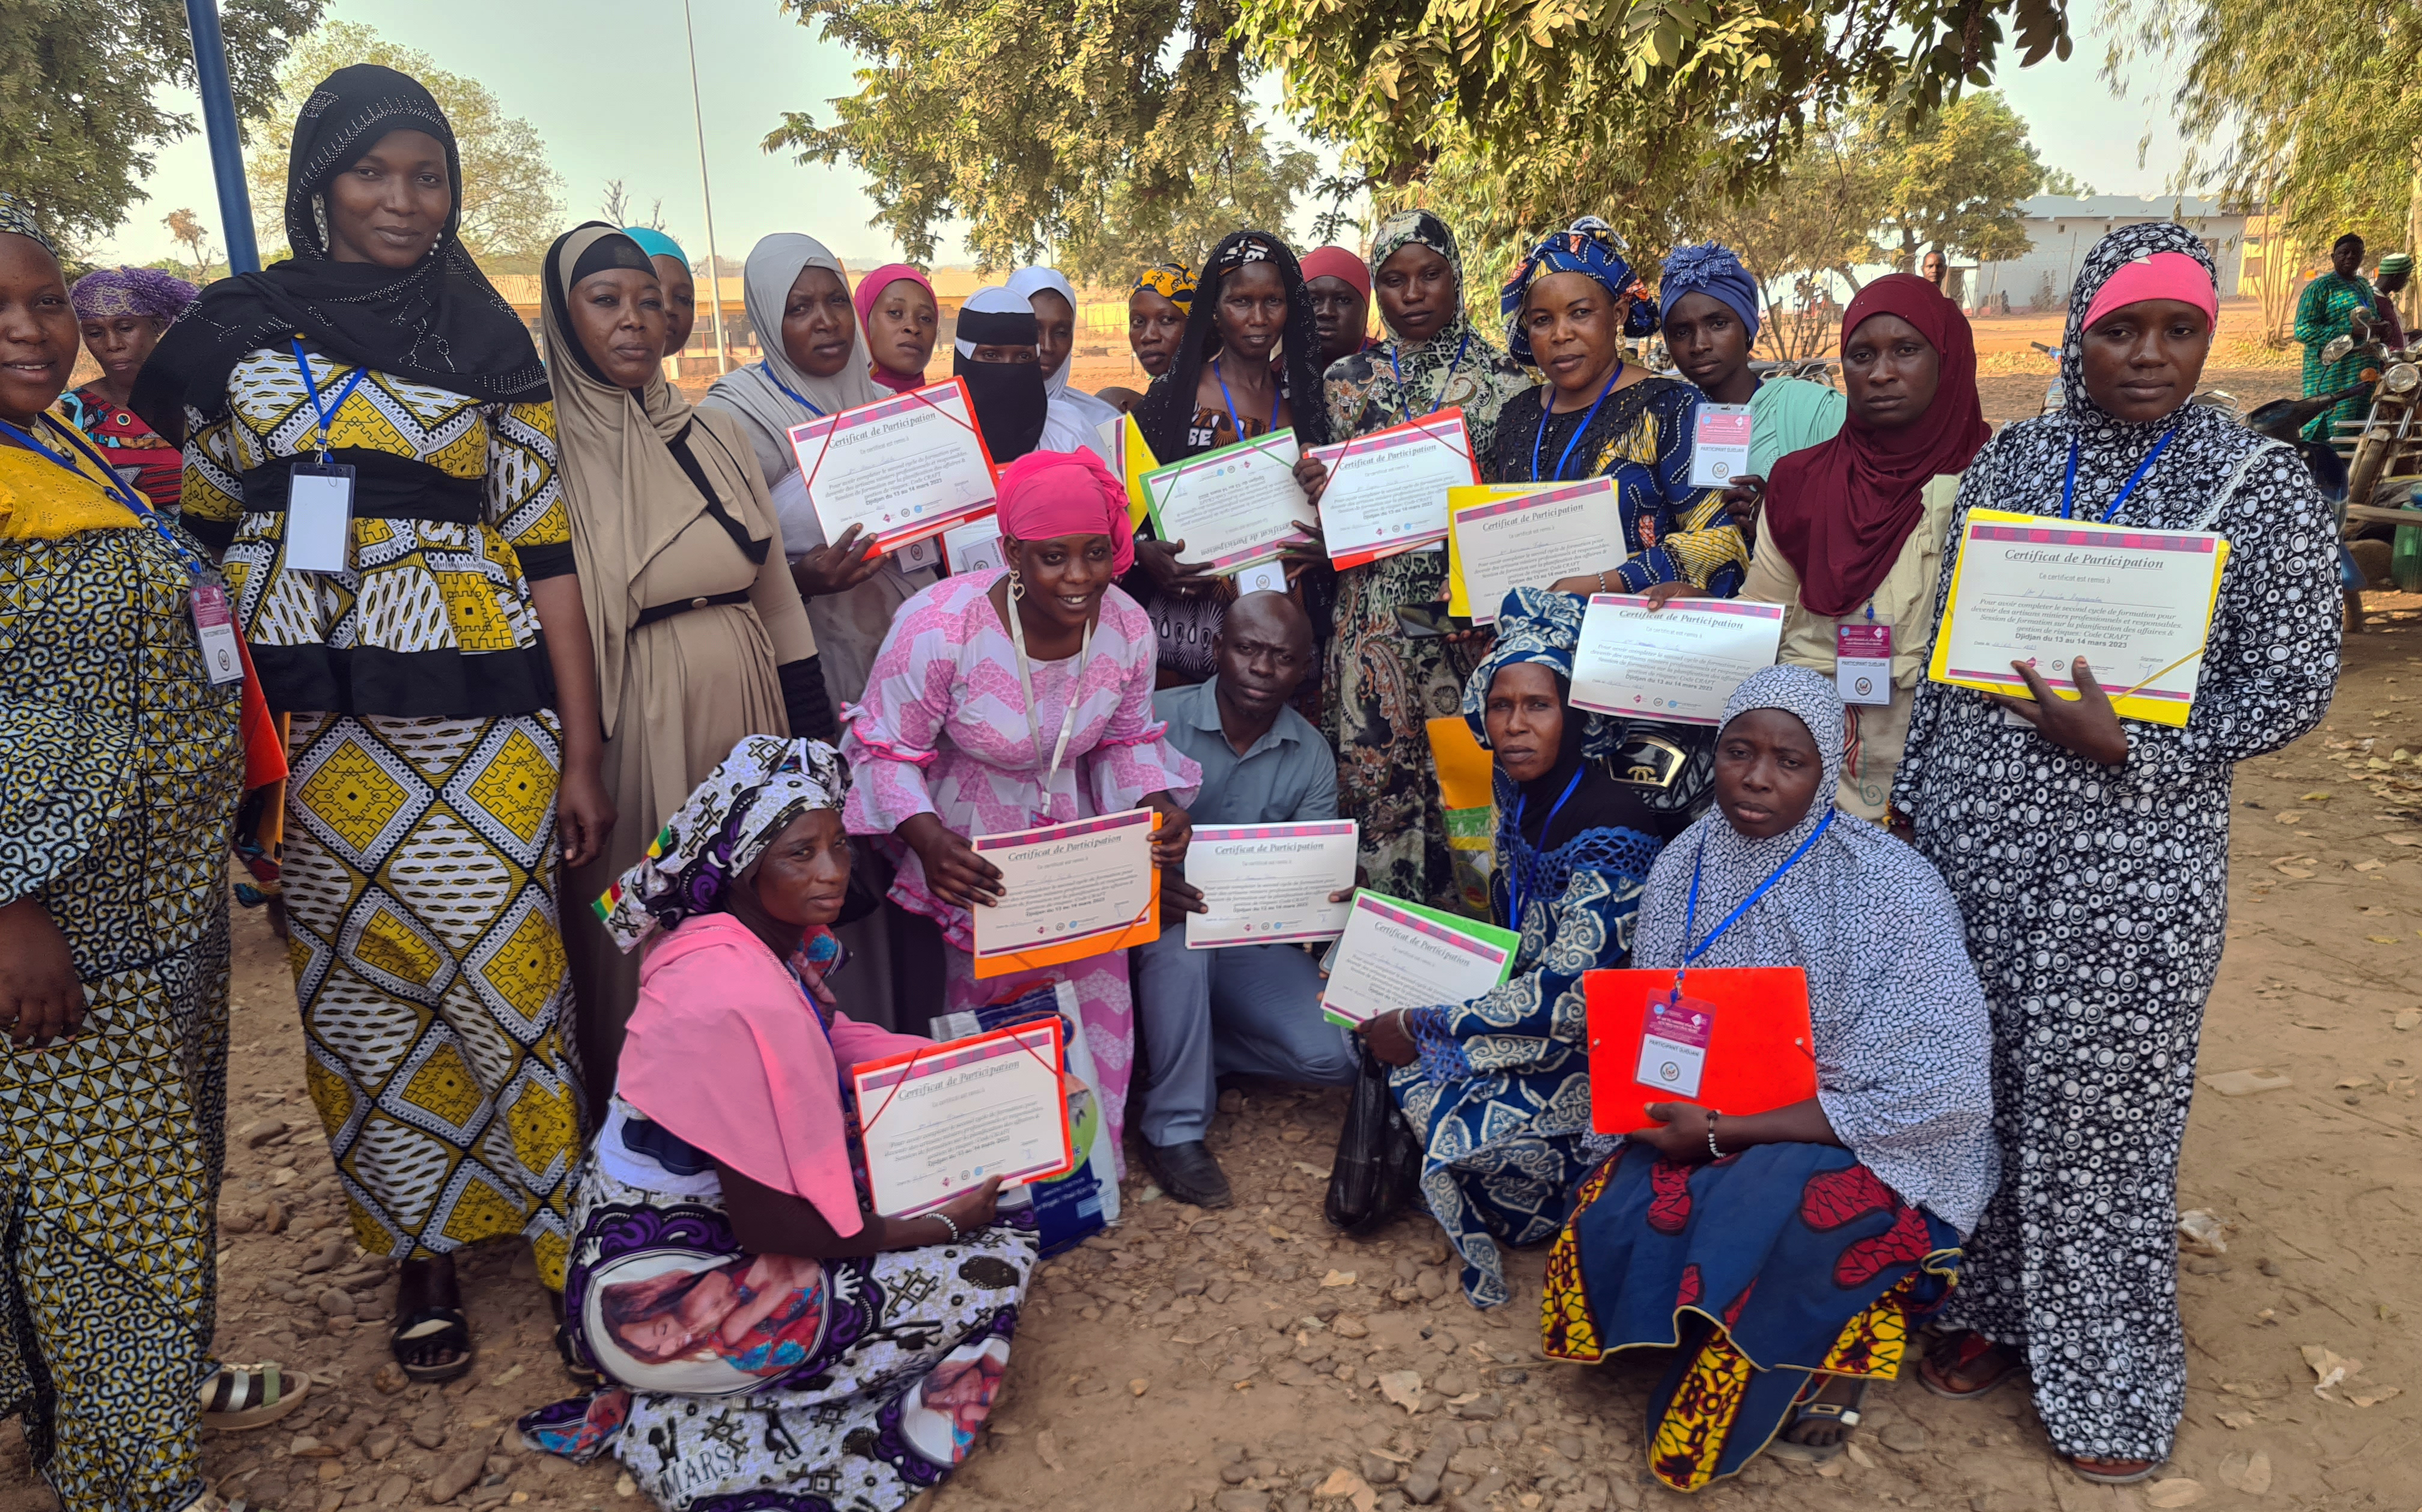 Women miners of Djeka Baara Cooperative in Keniéba, Mali, showing their certificates after completing a formalization training by Pact (Photo by Jorden de Haan)